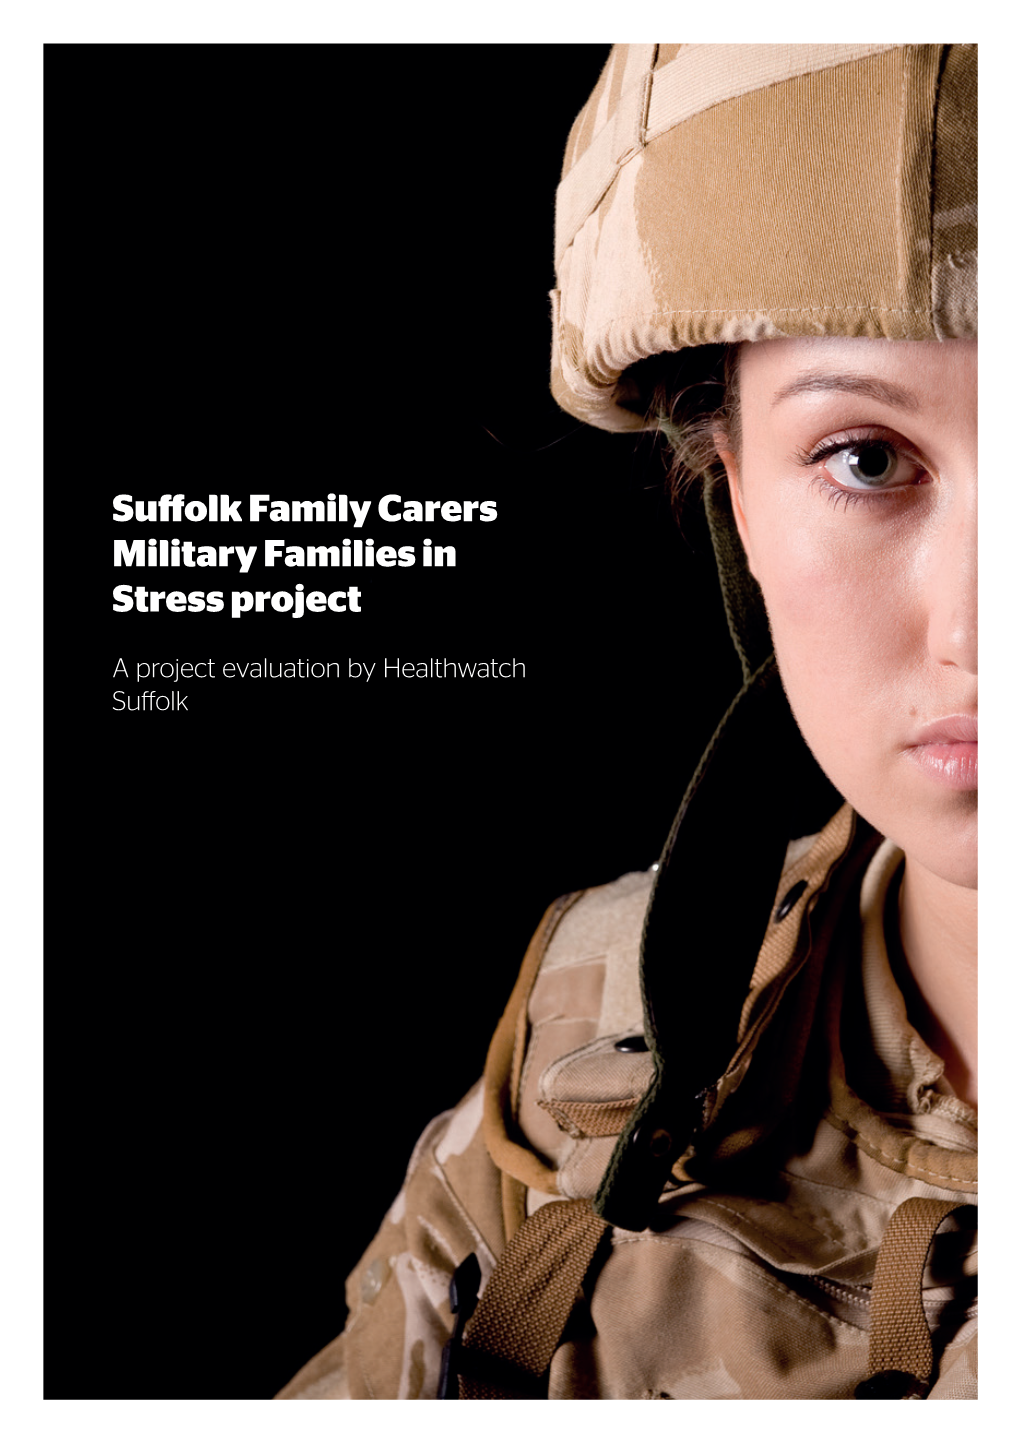 Suffolk Family Carers Military Families in Stress Project